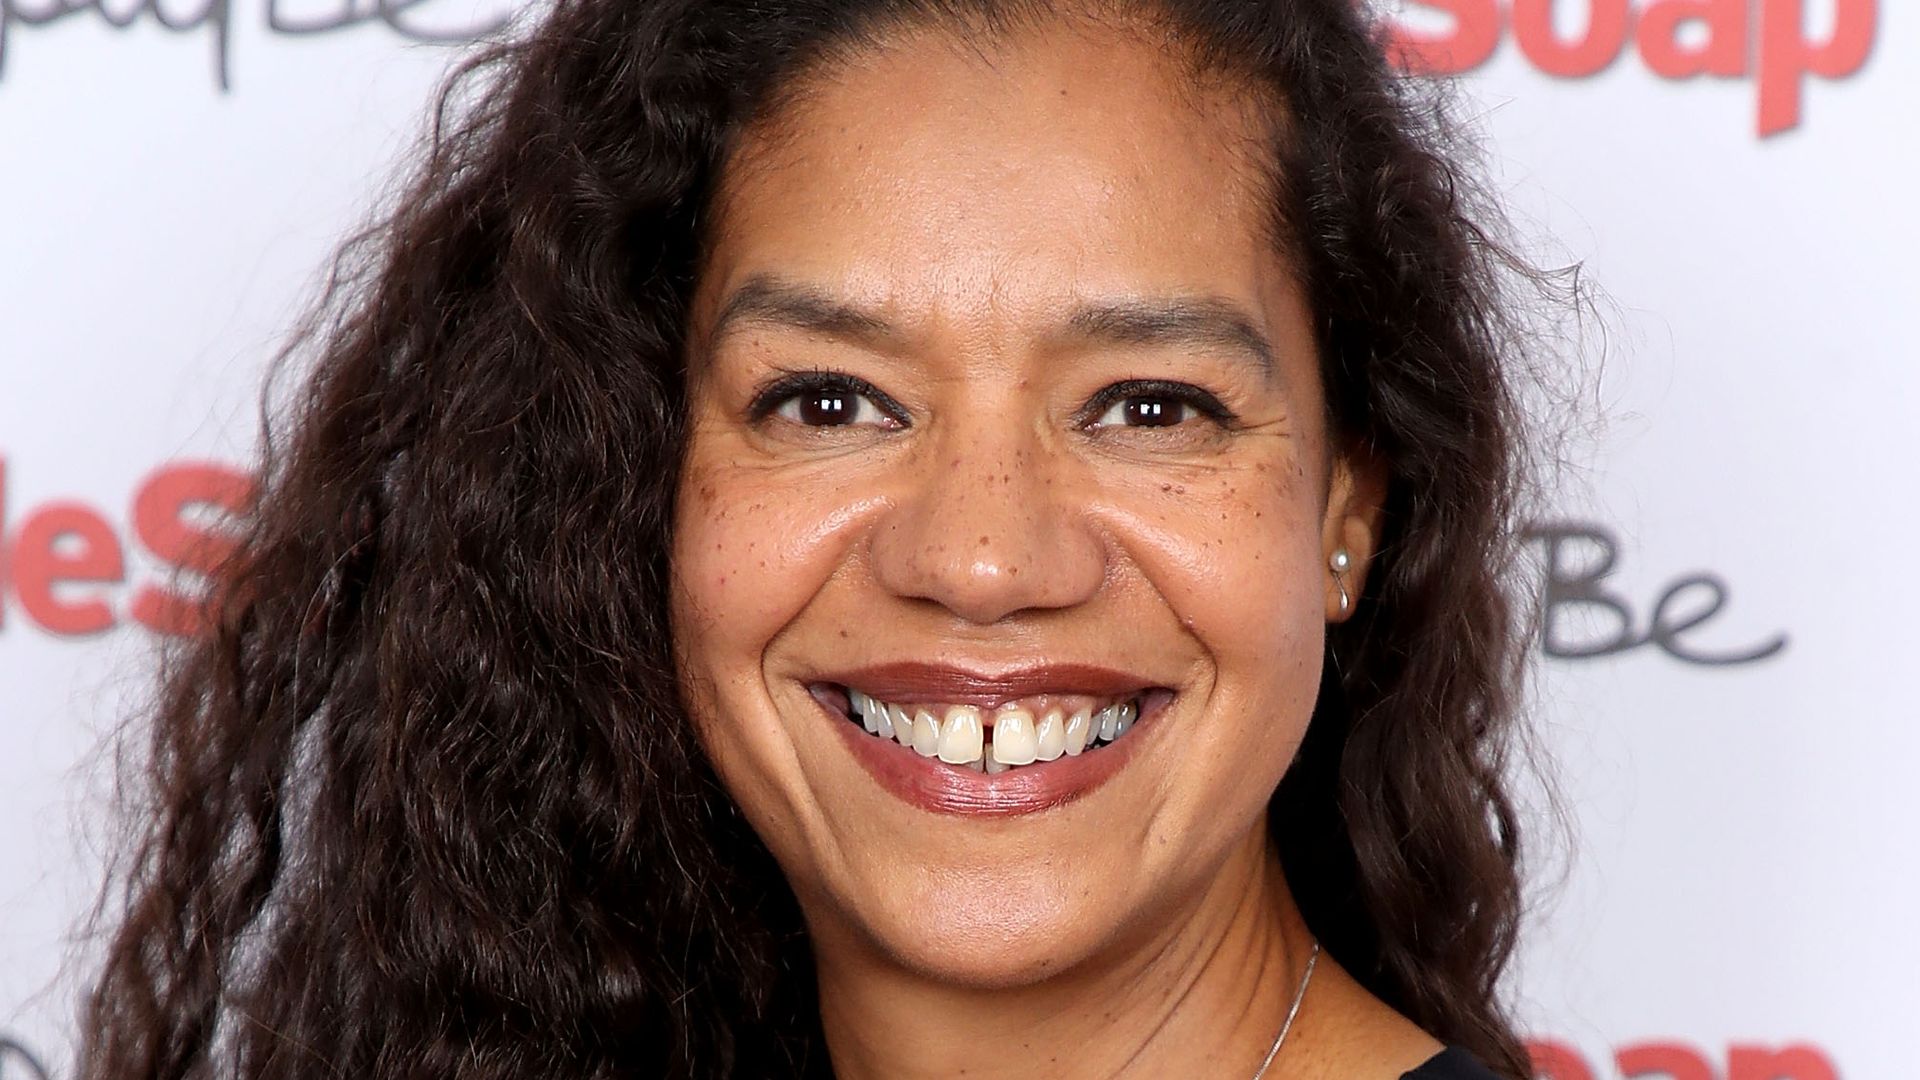 Jaye Griffiths smiling at a red carpet event